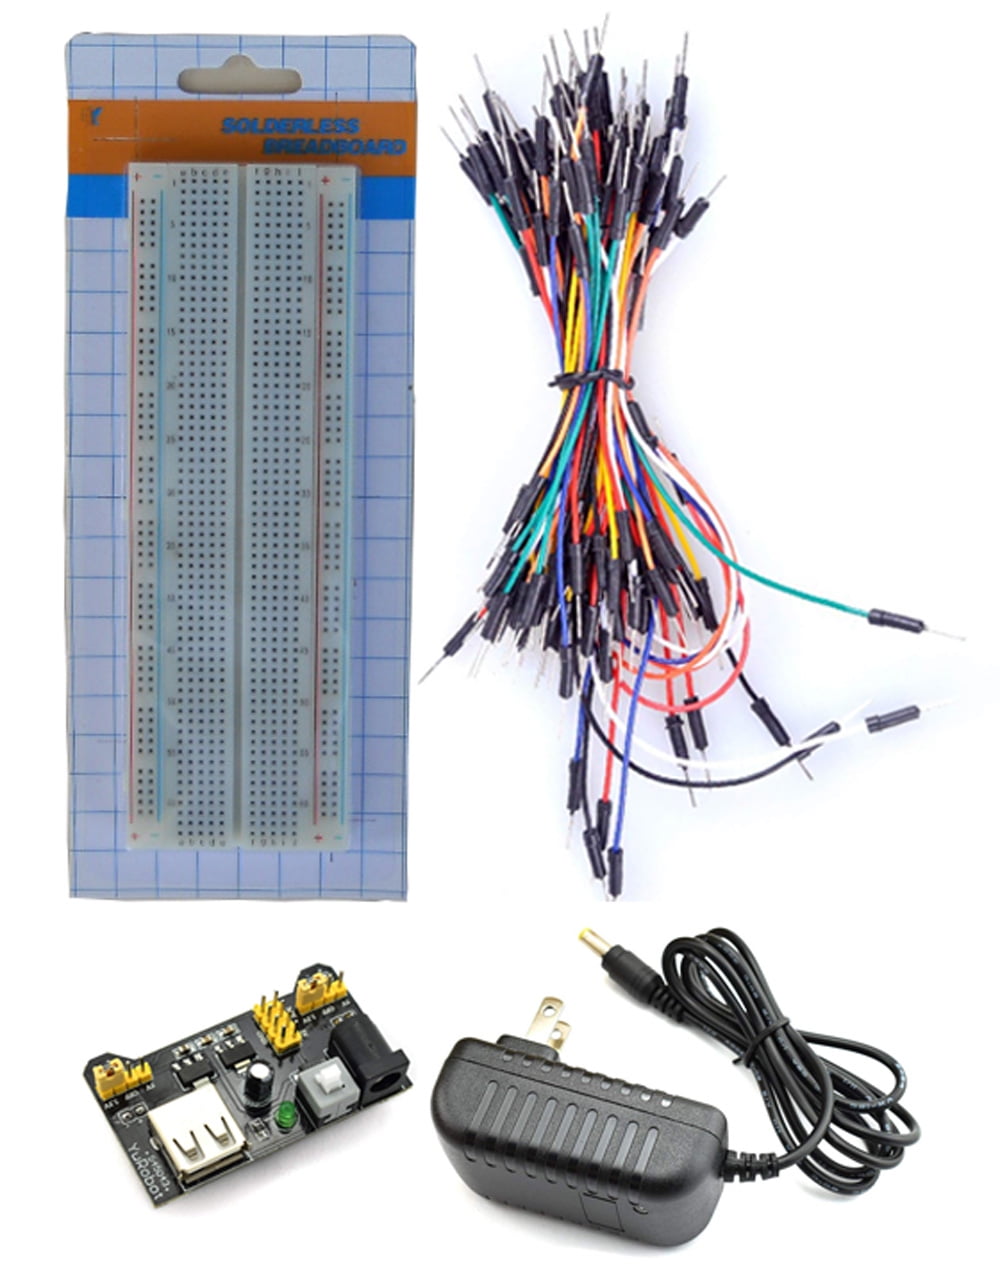 Brand new Breadboard Solderless Flexible Jumper Cable Wires Arduino 65 vary size 